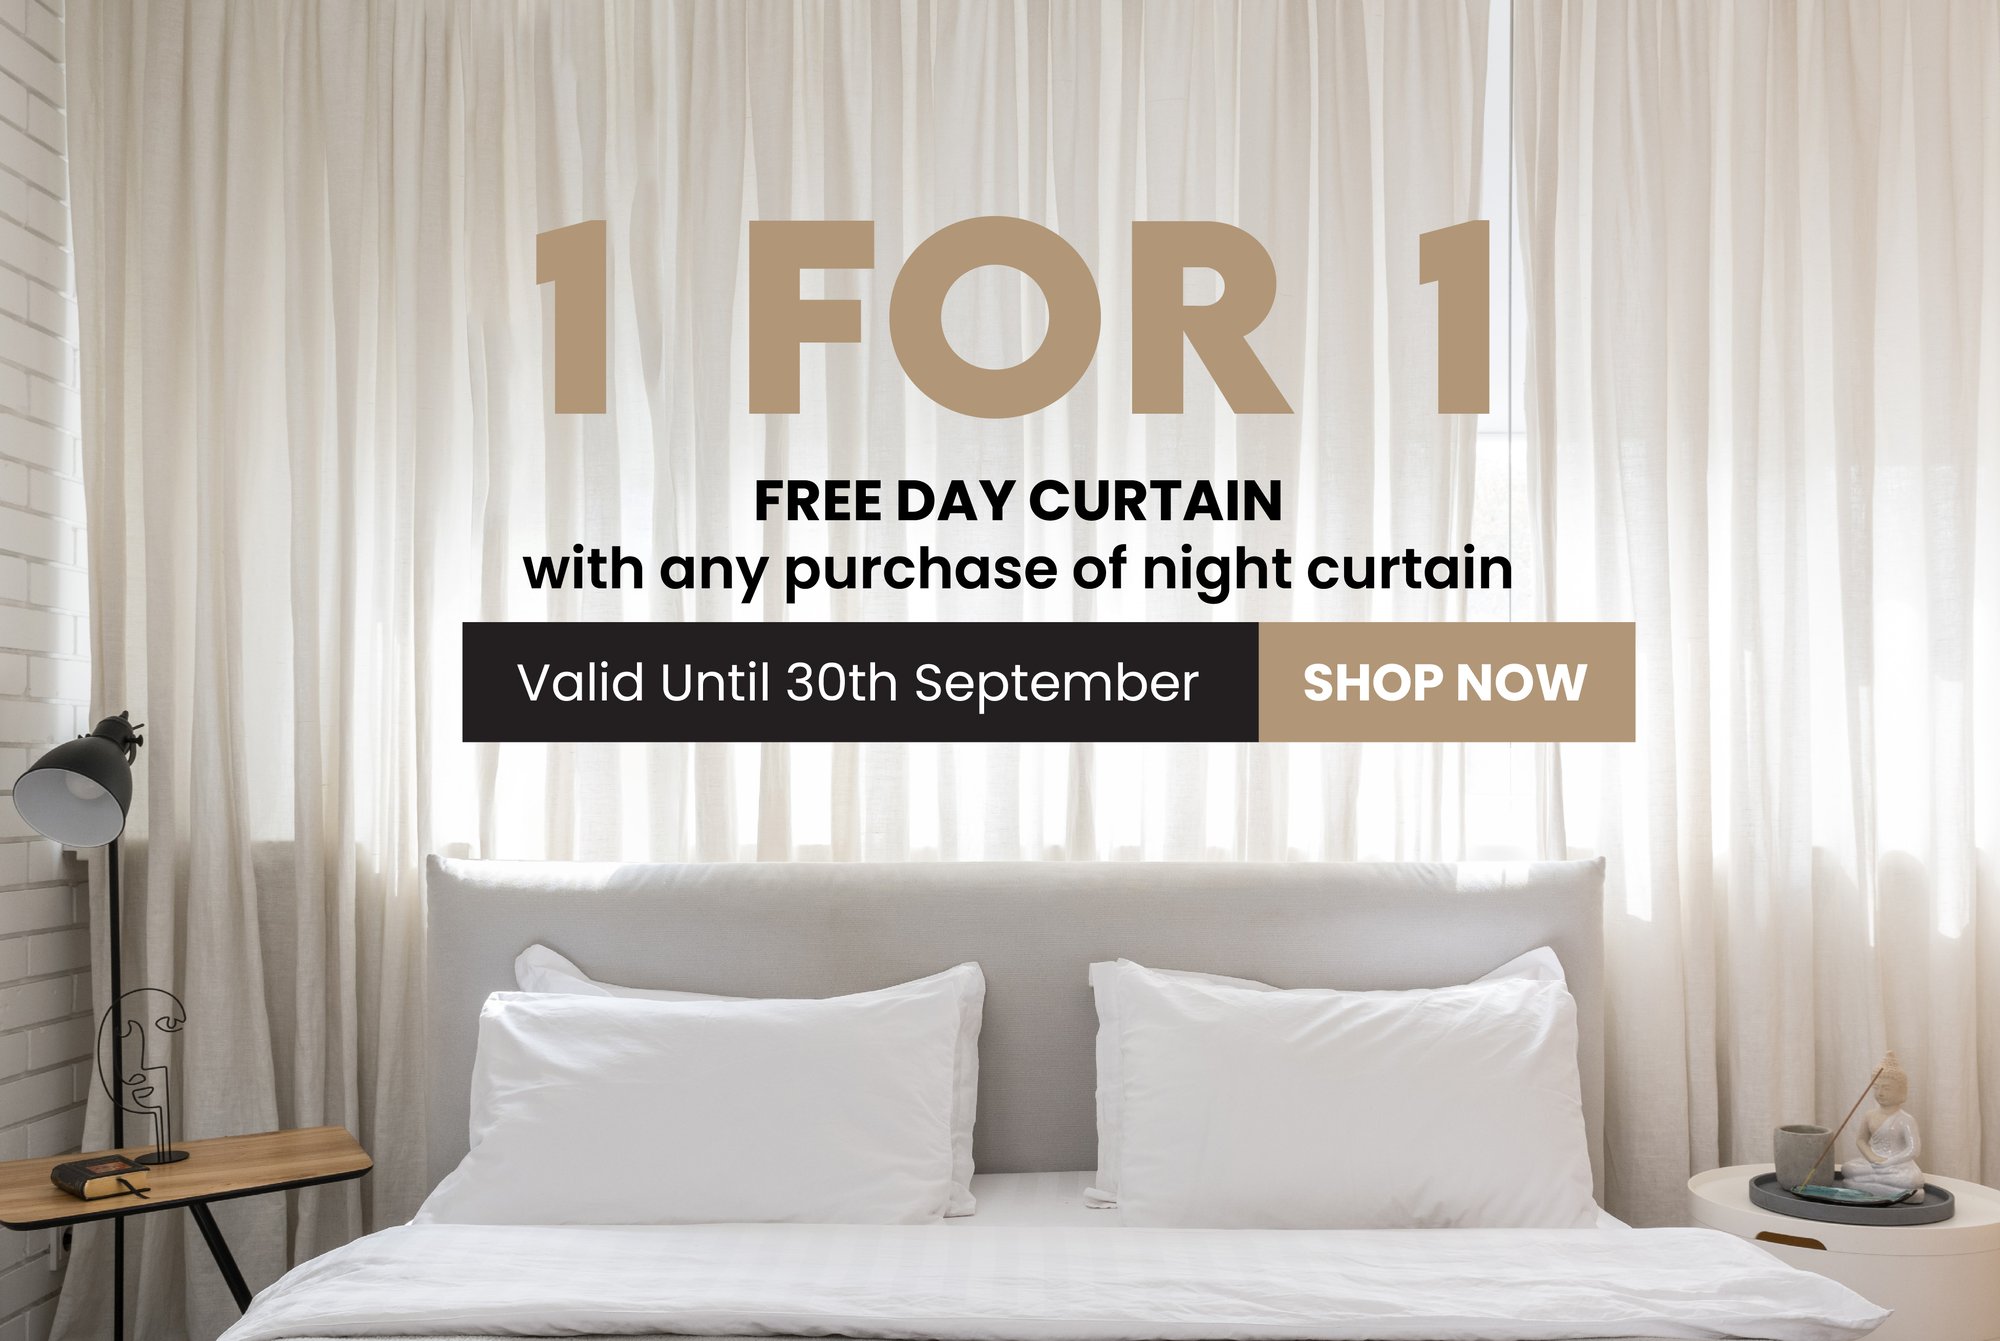 SS Free Day Curtain big